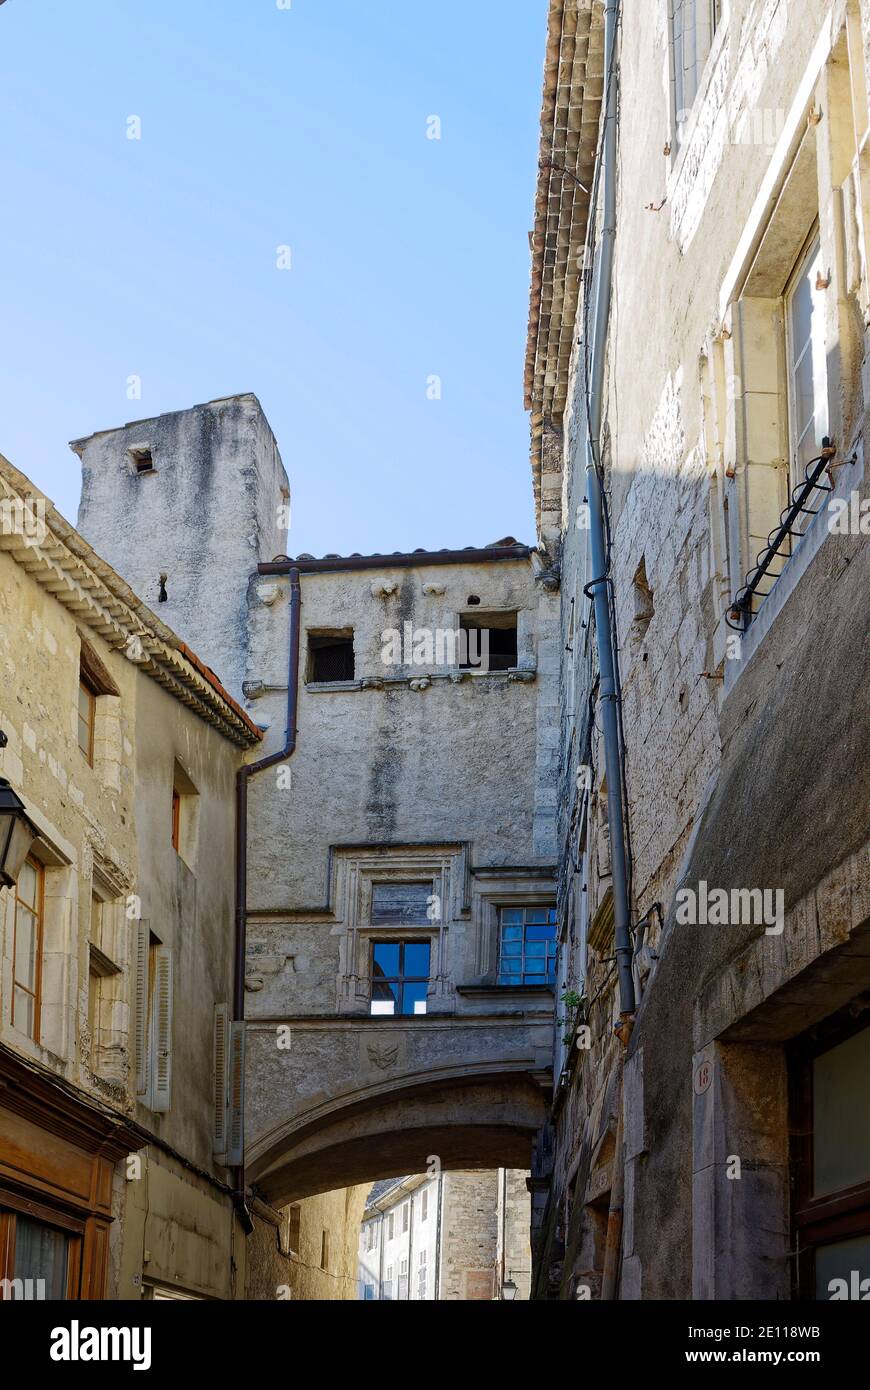 2 old buildings, connected with arched structure, architecture, narrow street, Europe, Viviers, France; summer Stock Photo